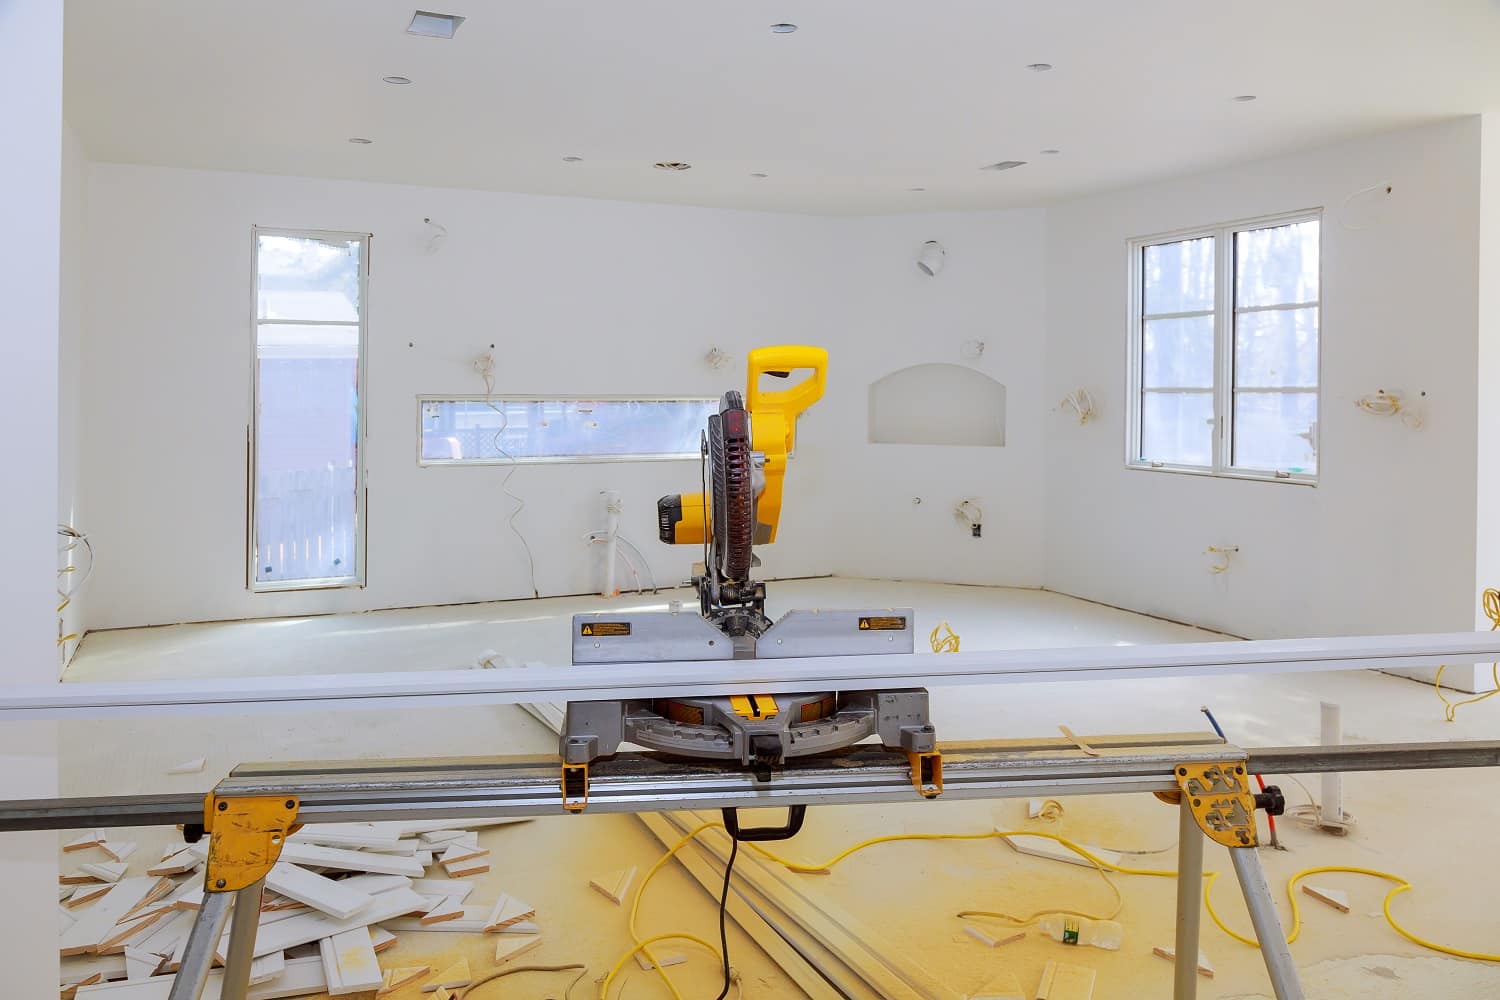 Contractor uses a circular saw to cut trim molding saw on a construction site